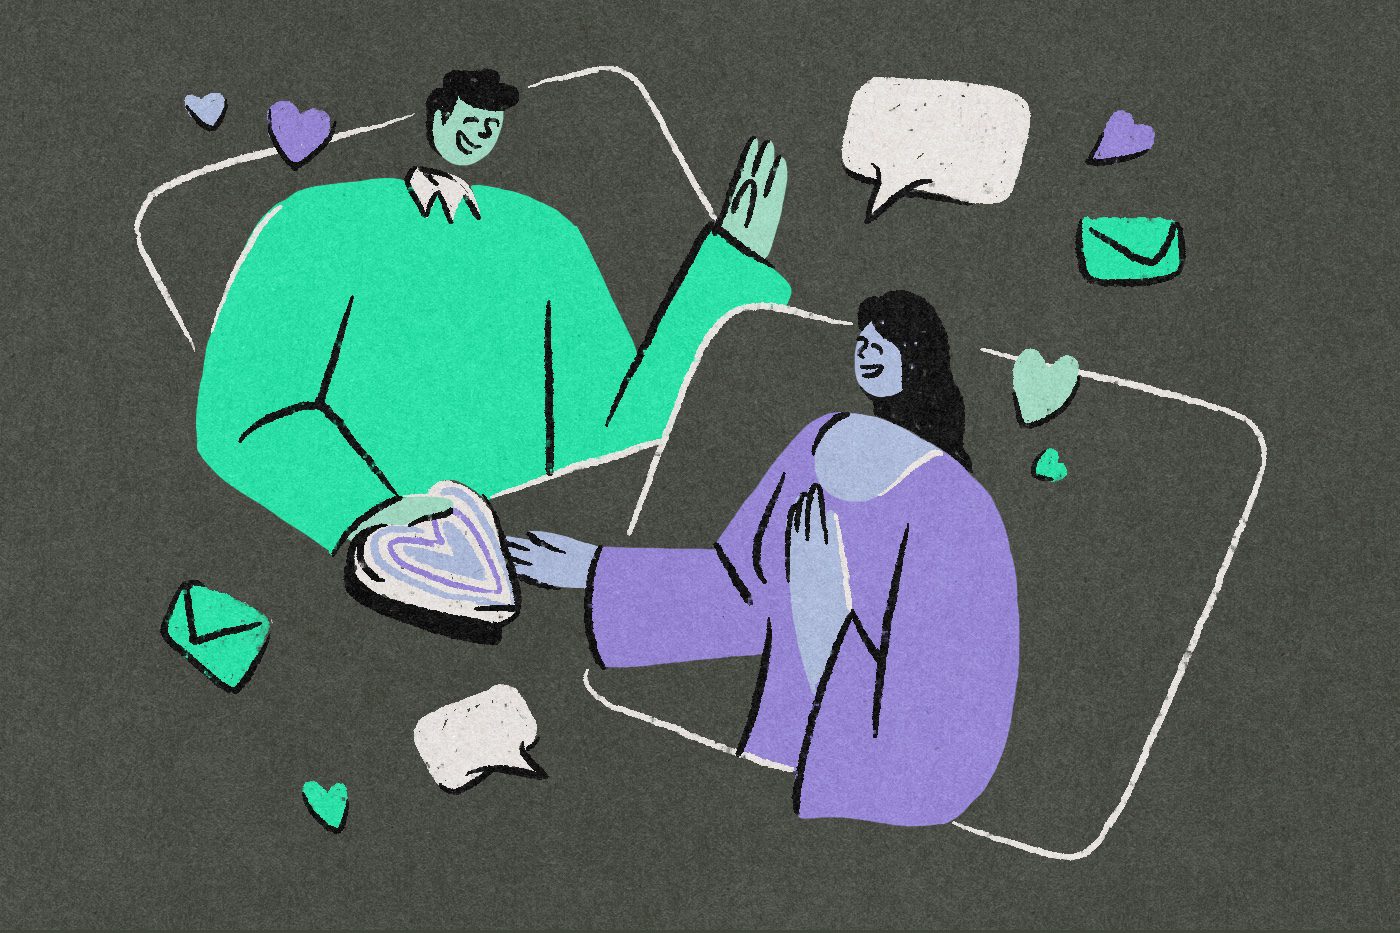 Two people chatting demonstrate that client engagement requires clear communication. (And sometimes valentines.)